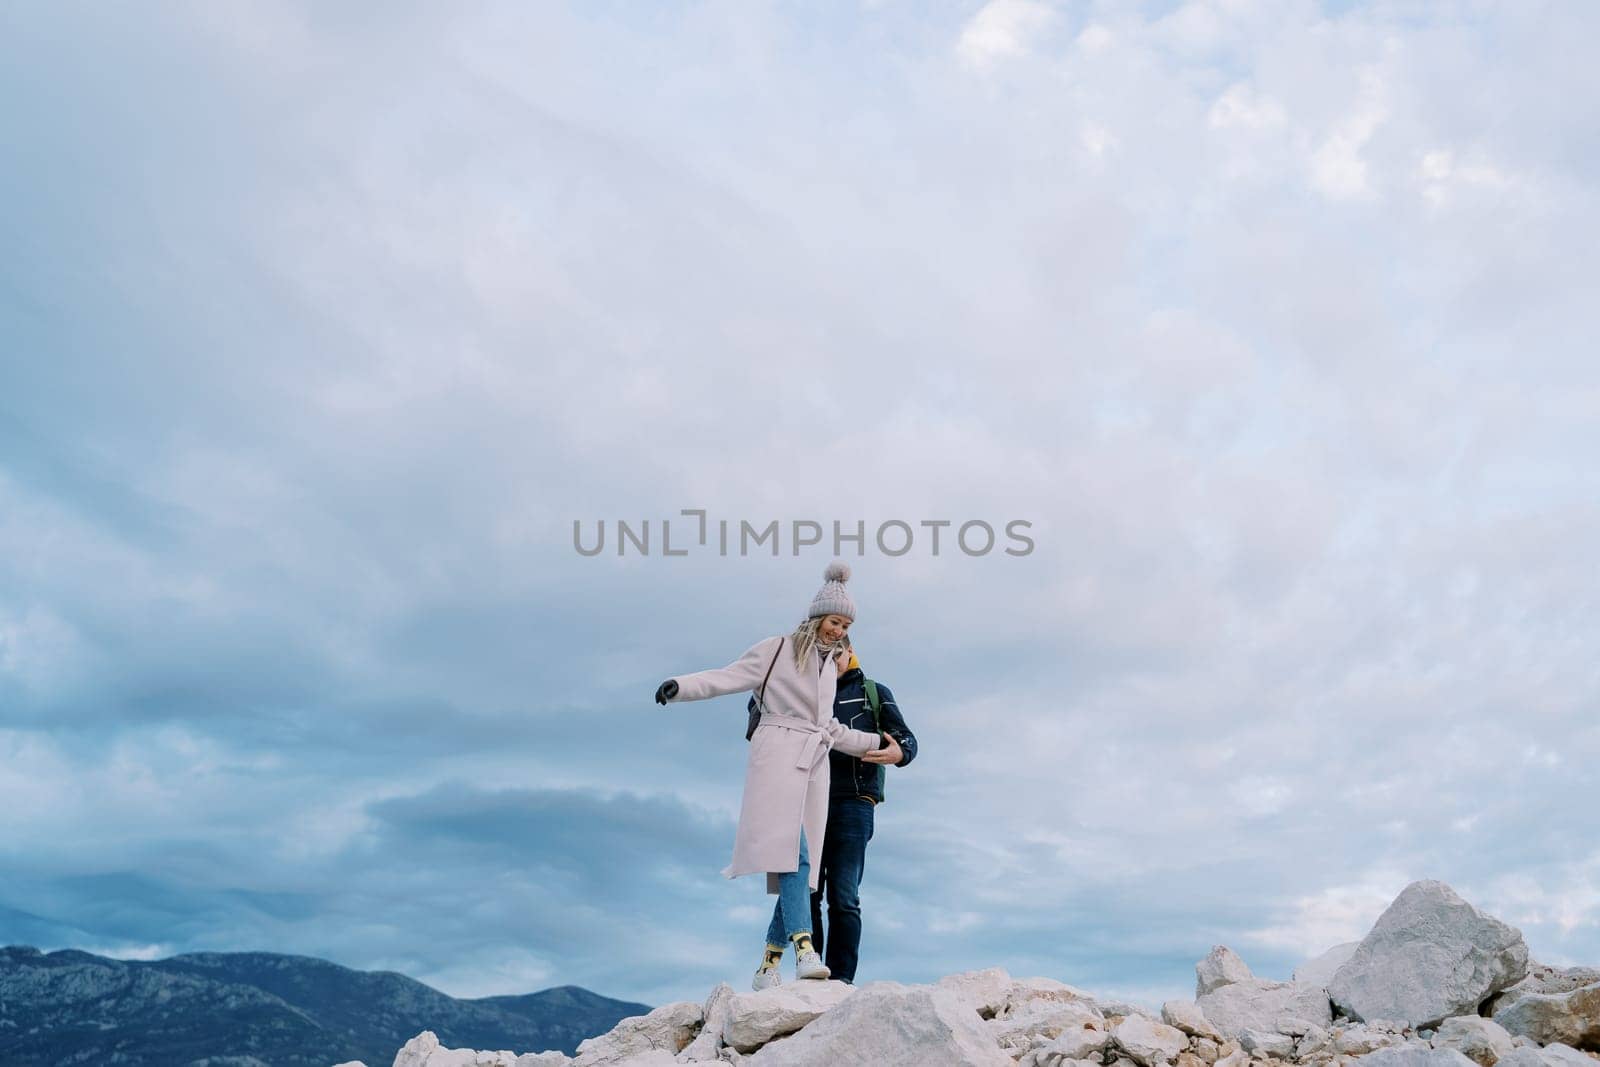 Man helps woman walk on the rocks, holding her hand in the mountains by Nadtochiy